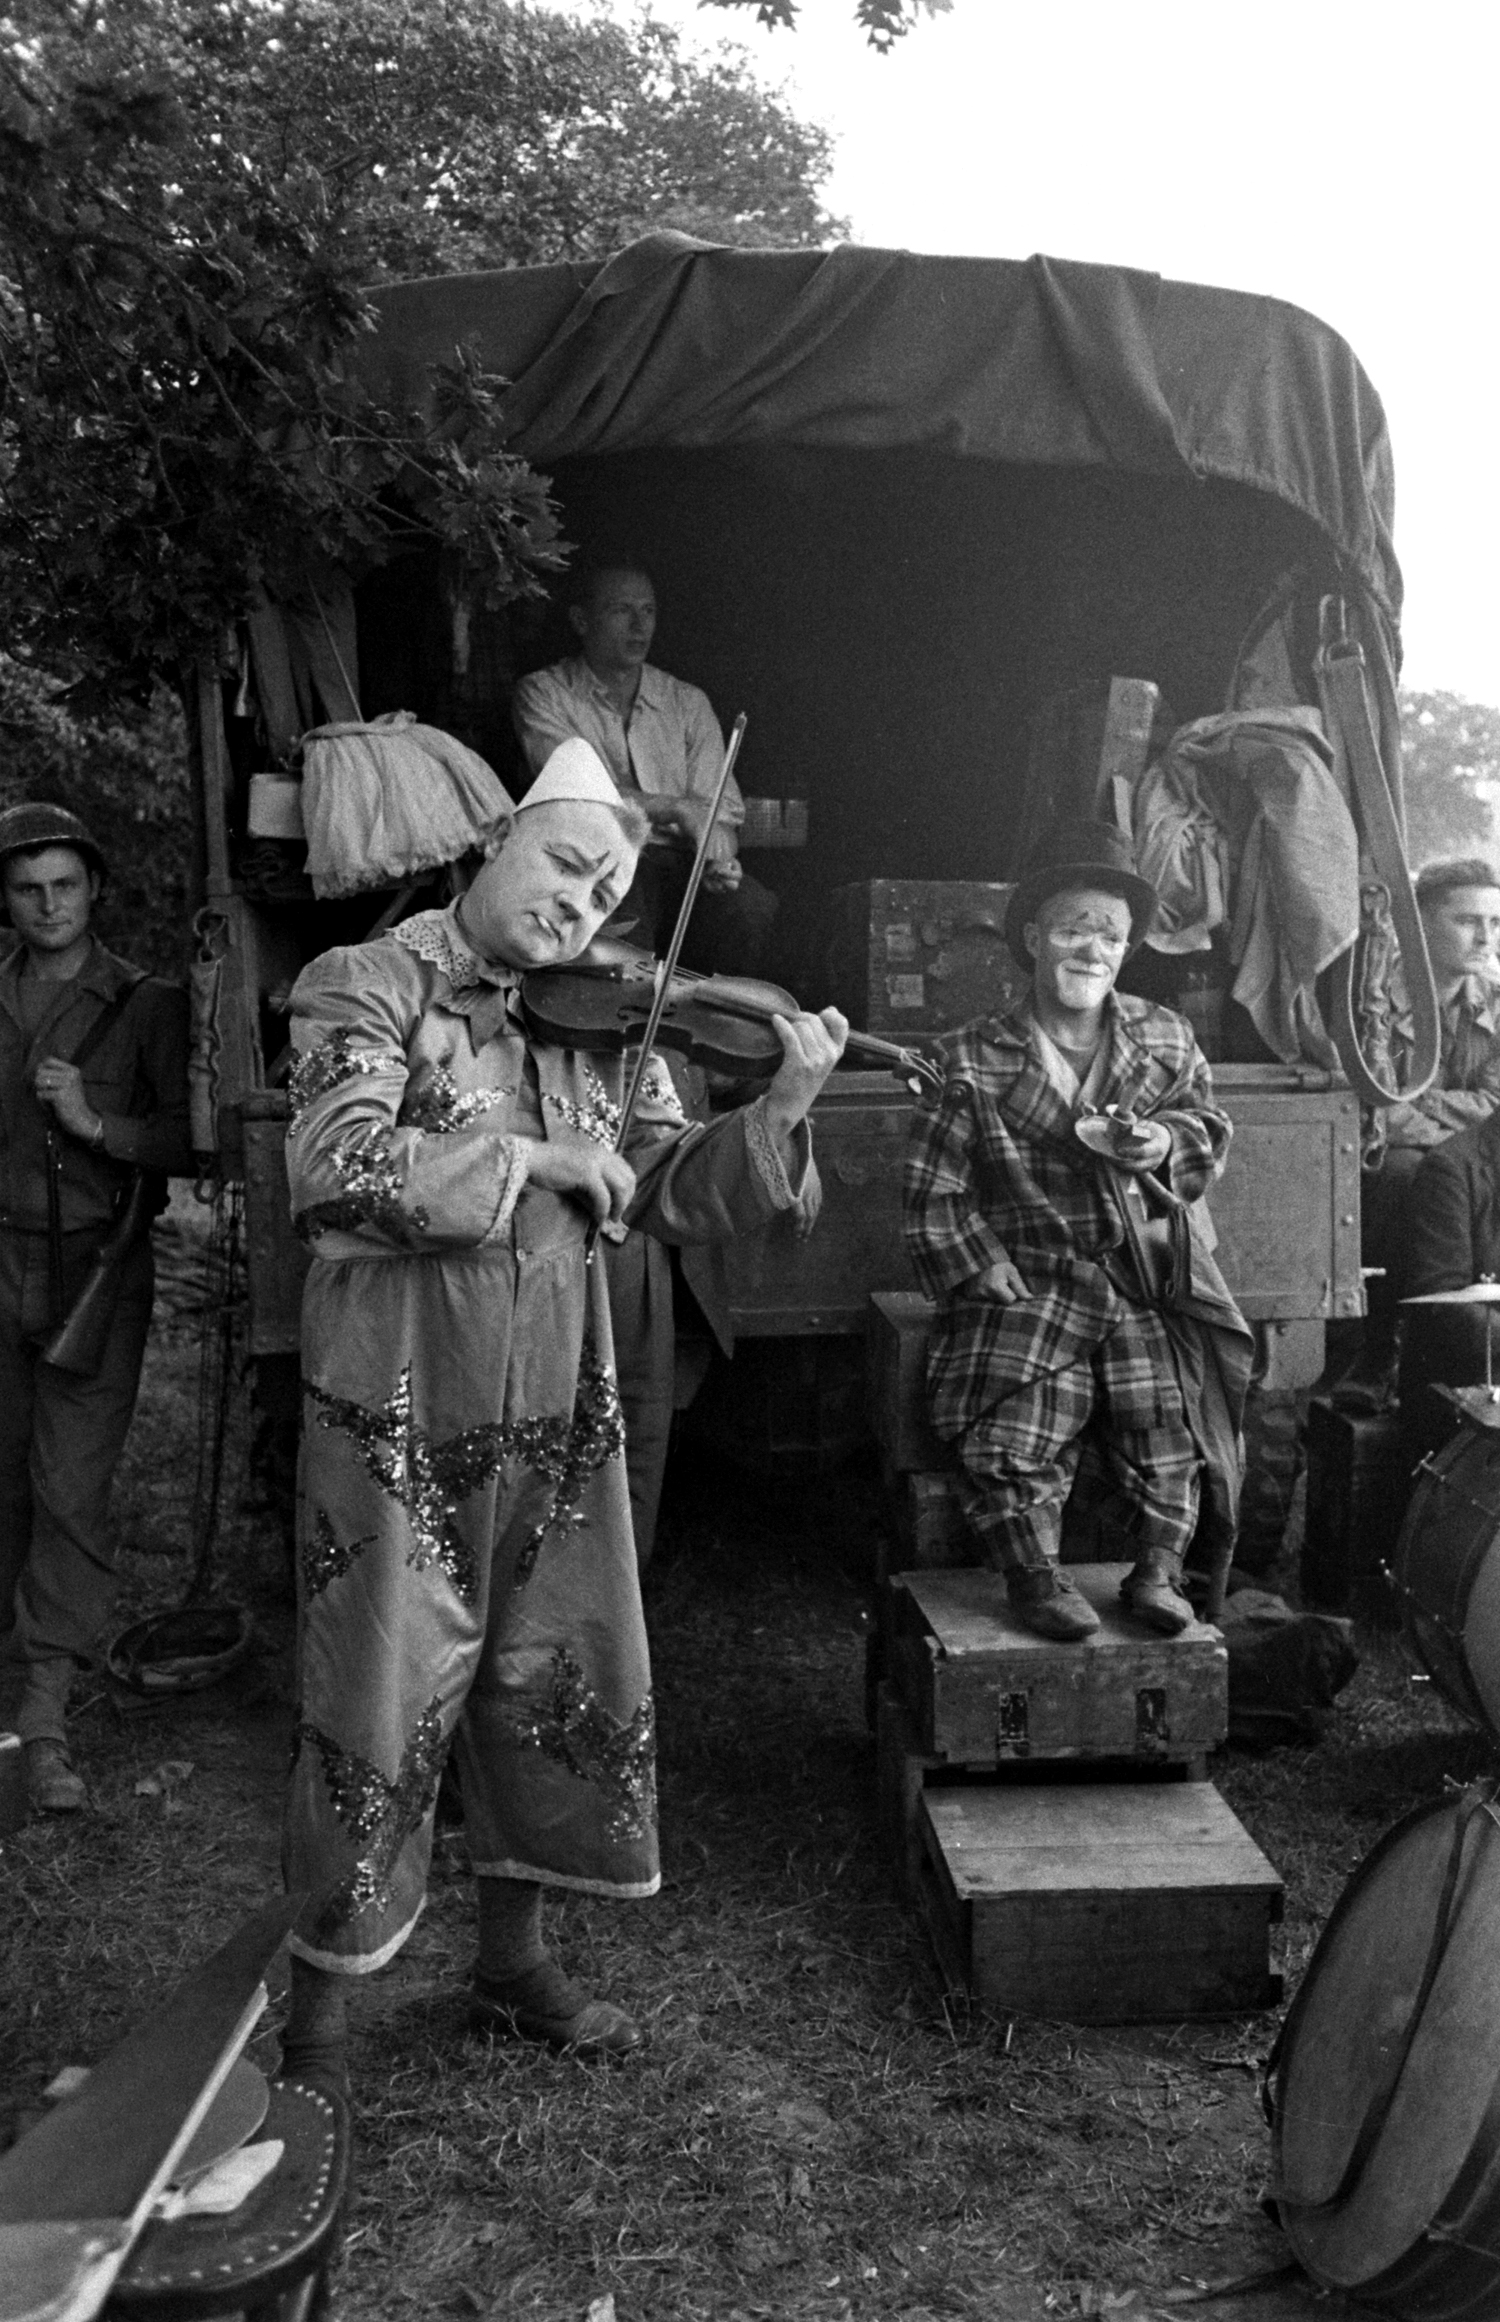 Performers in show for U.S. troops after D-Day, Normandy, 1944.